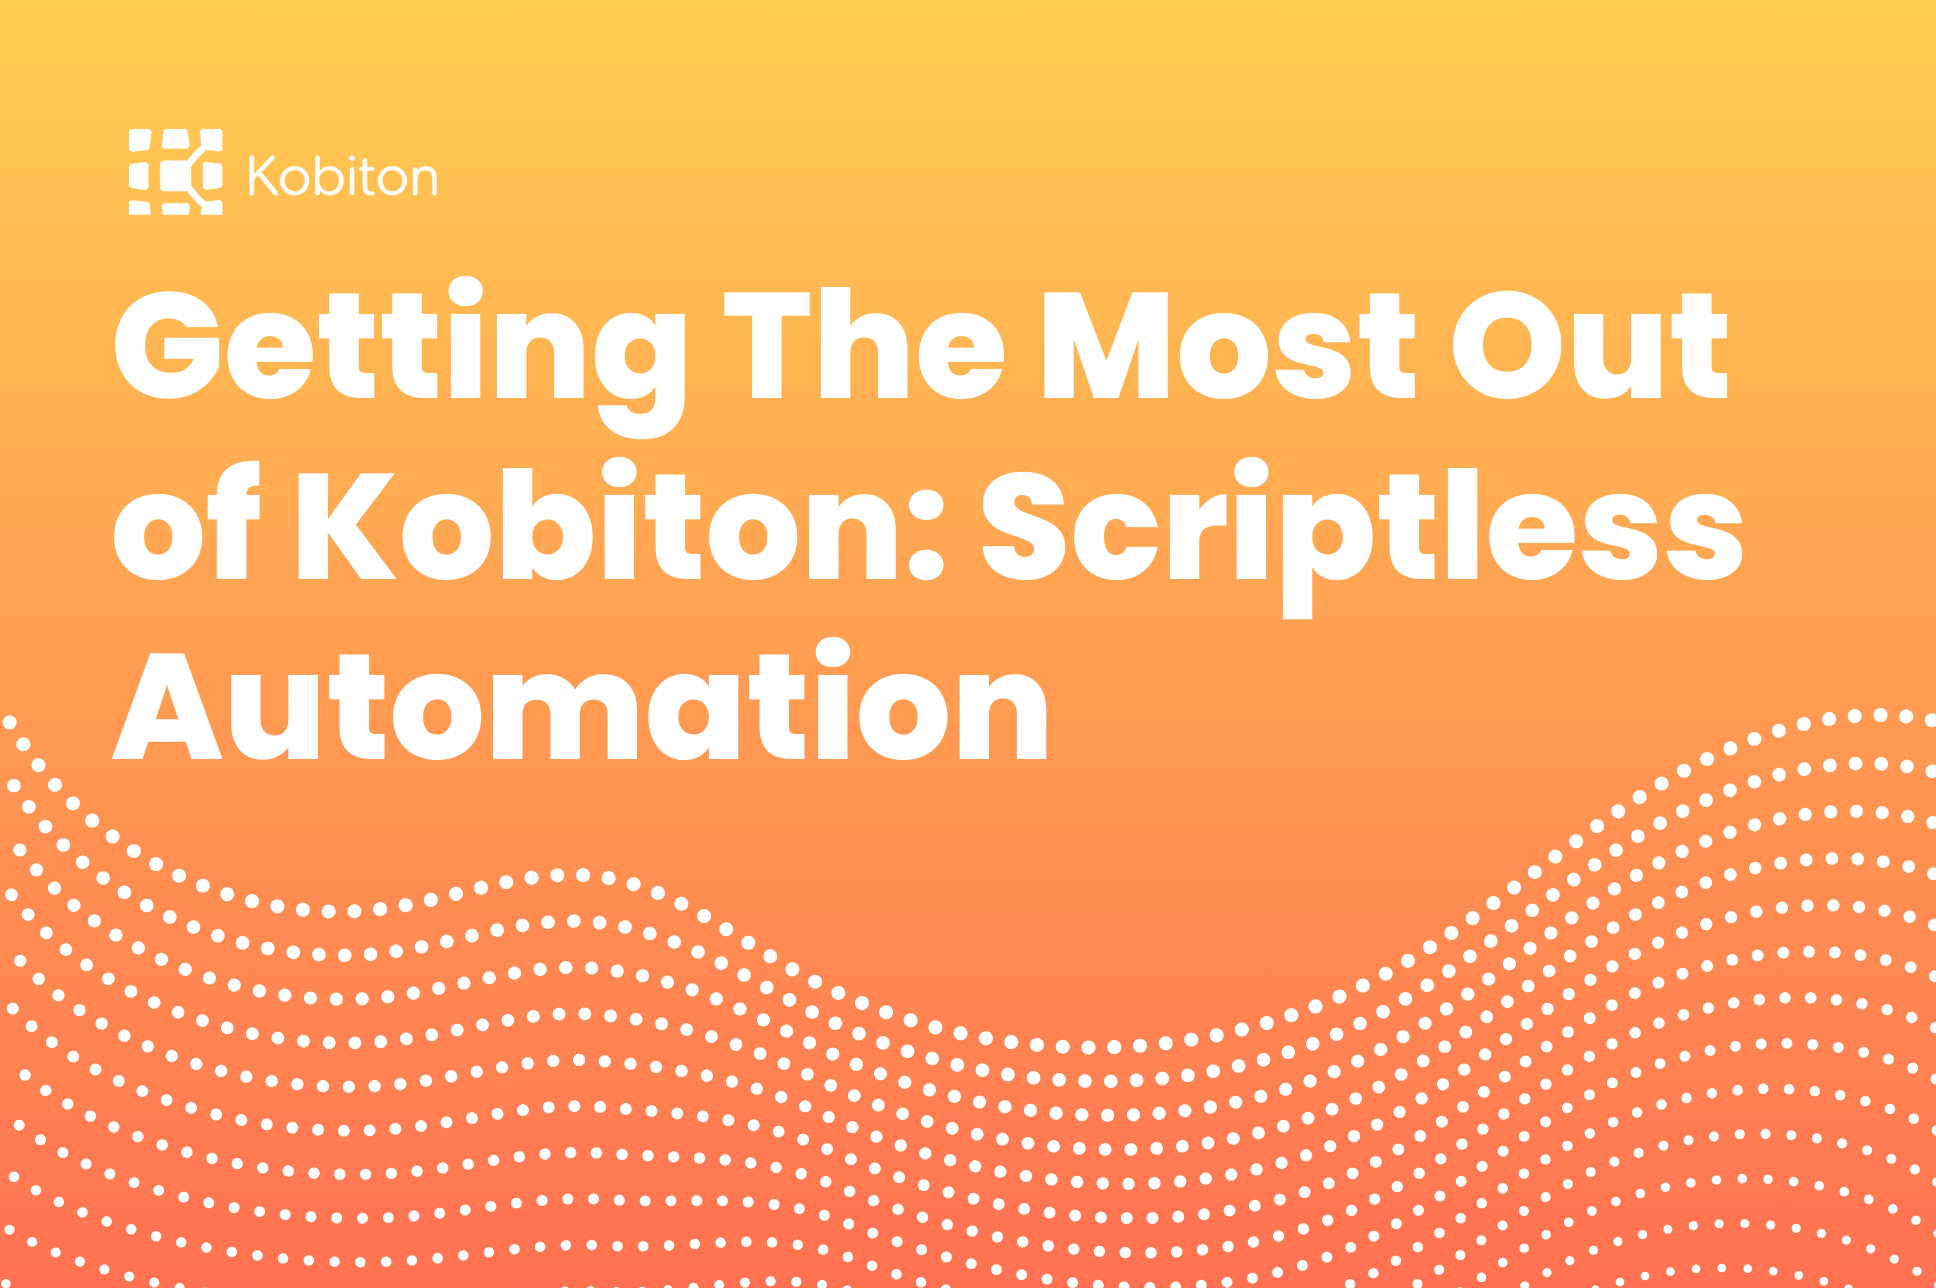 Scriptless Automation